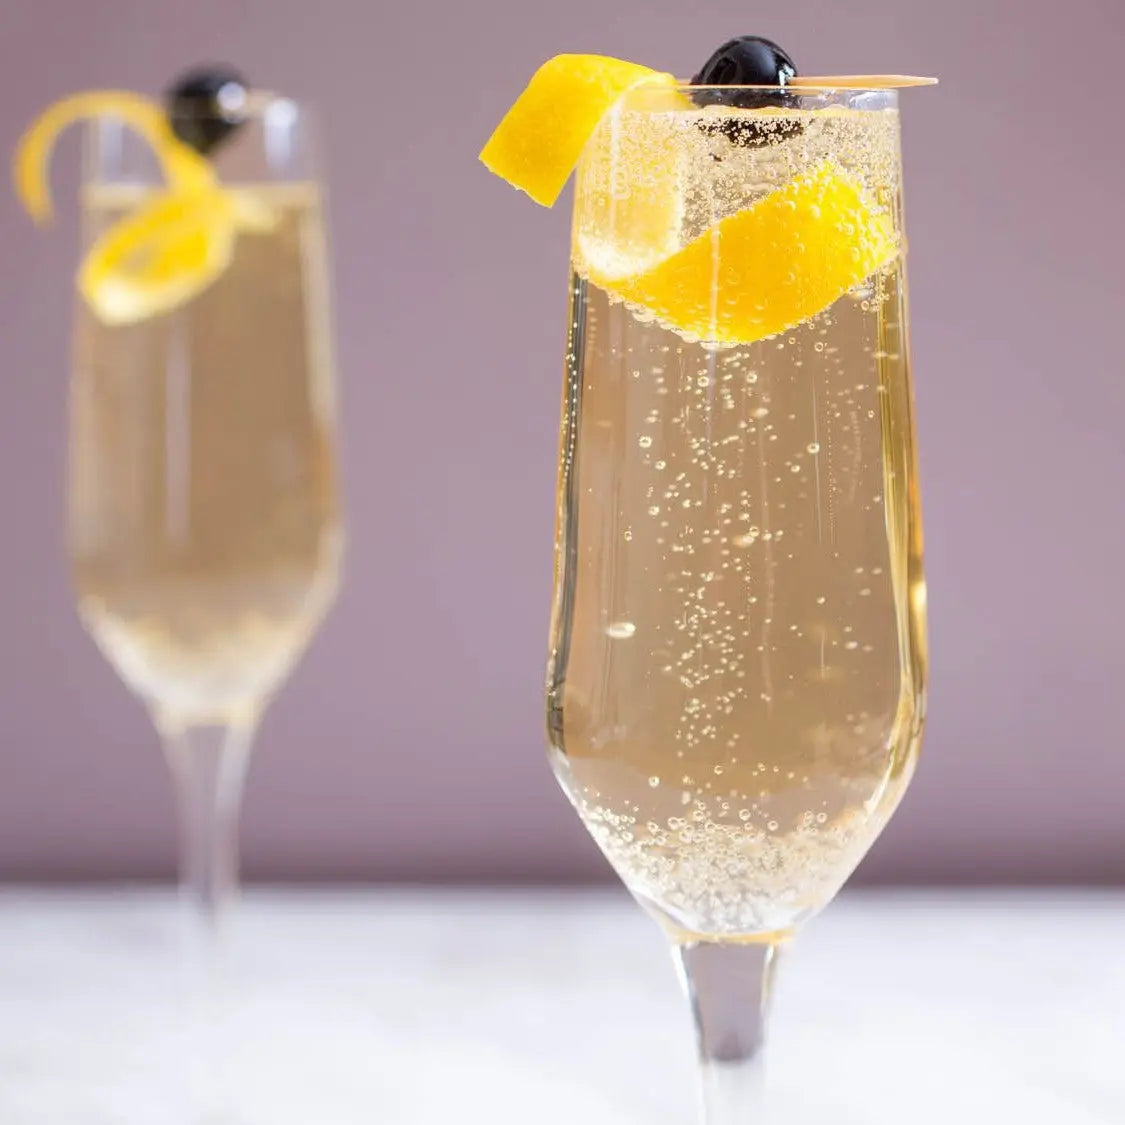 How to make a French 75 Cocktail